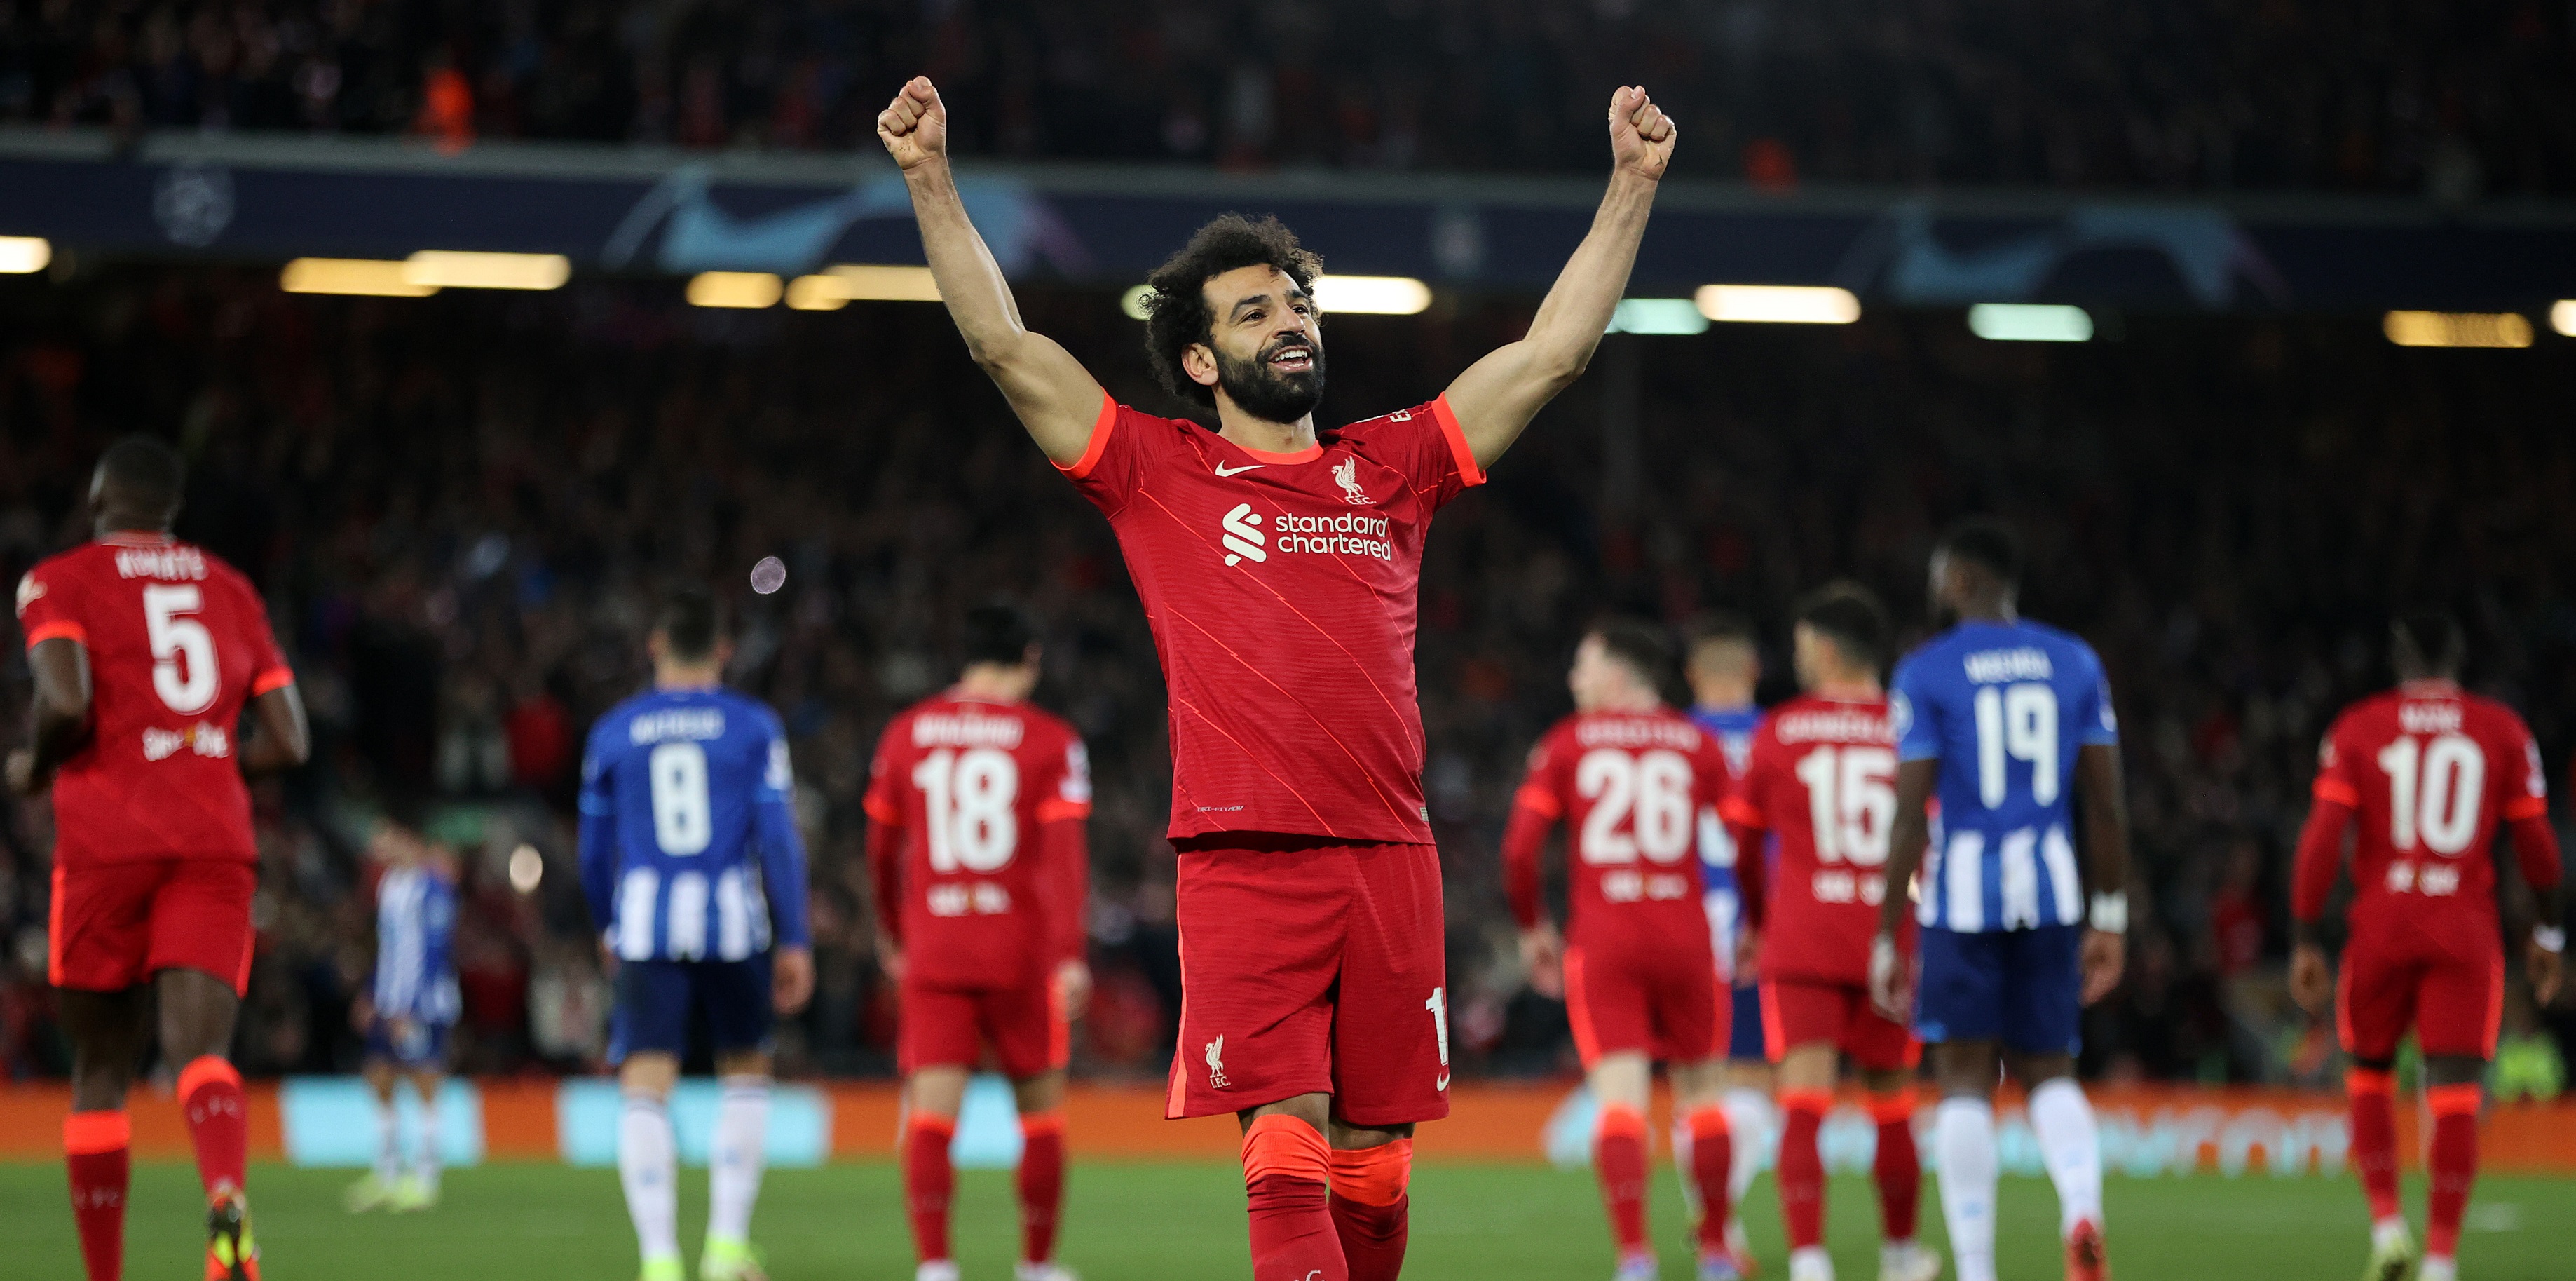 Mo Salah explains why he picked Chelsea over Liverpool in 2014 in decision that had ‘tough’ consequences